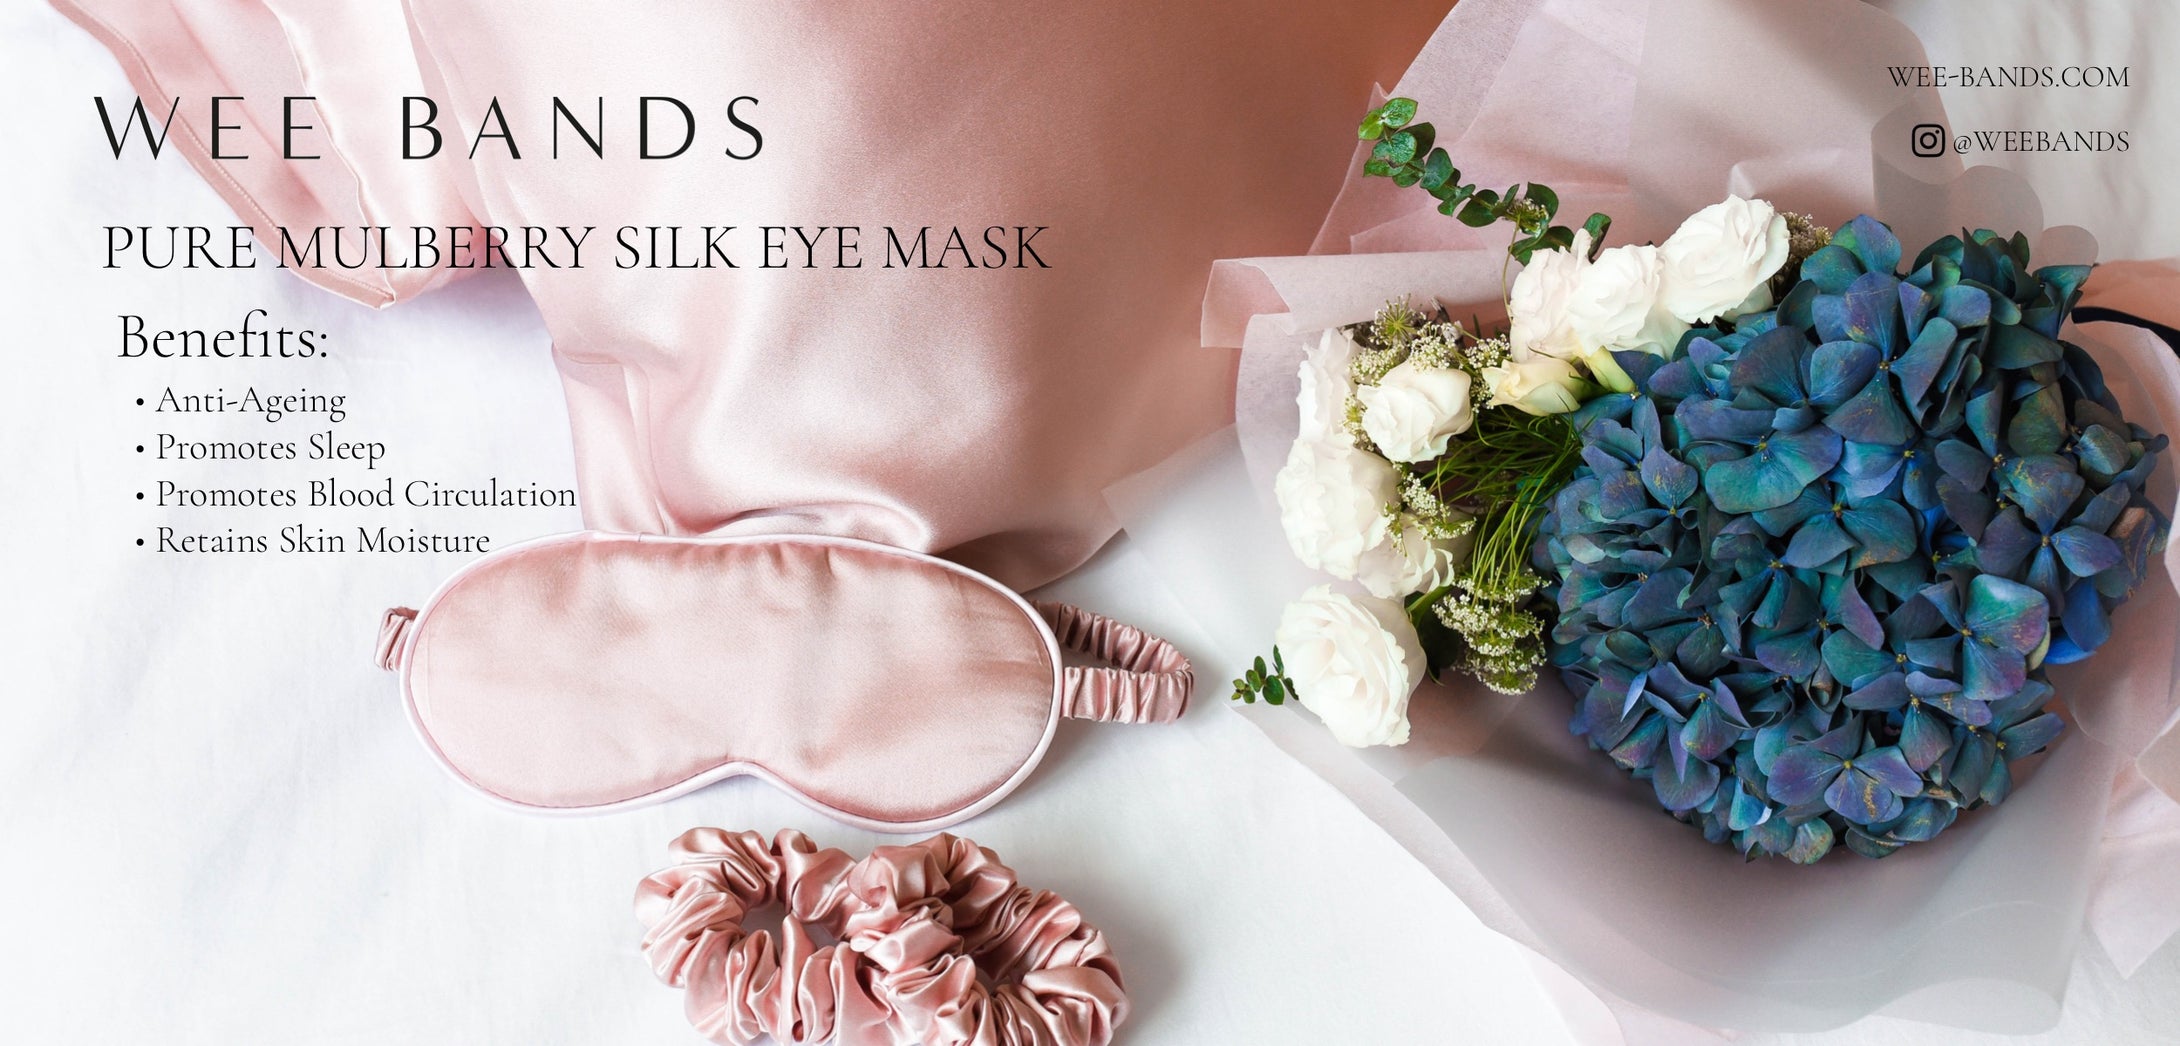 Silk Eye Mask by Wee Bands are made of 100% Pure Mulberry Silk. They help defy aging and smoothen your skin!